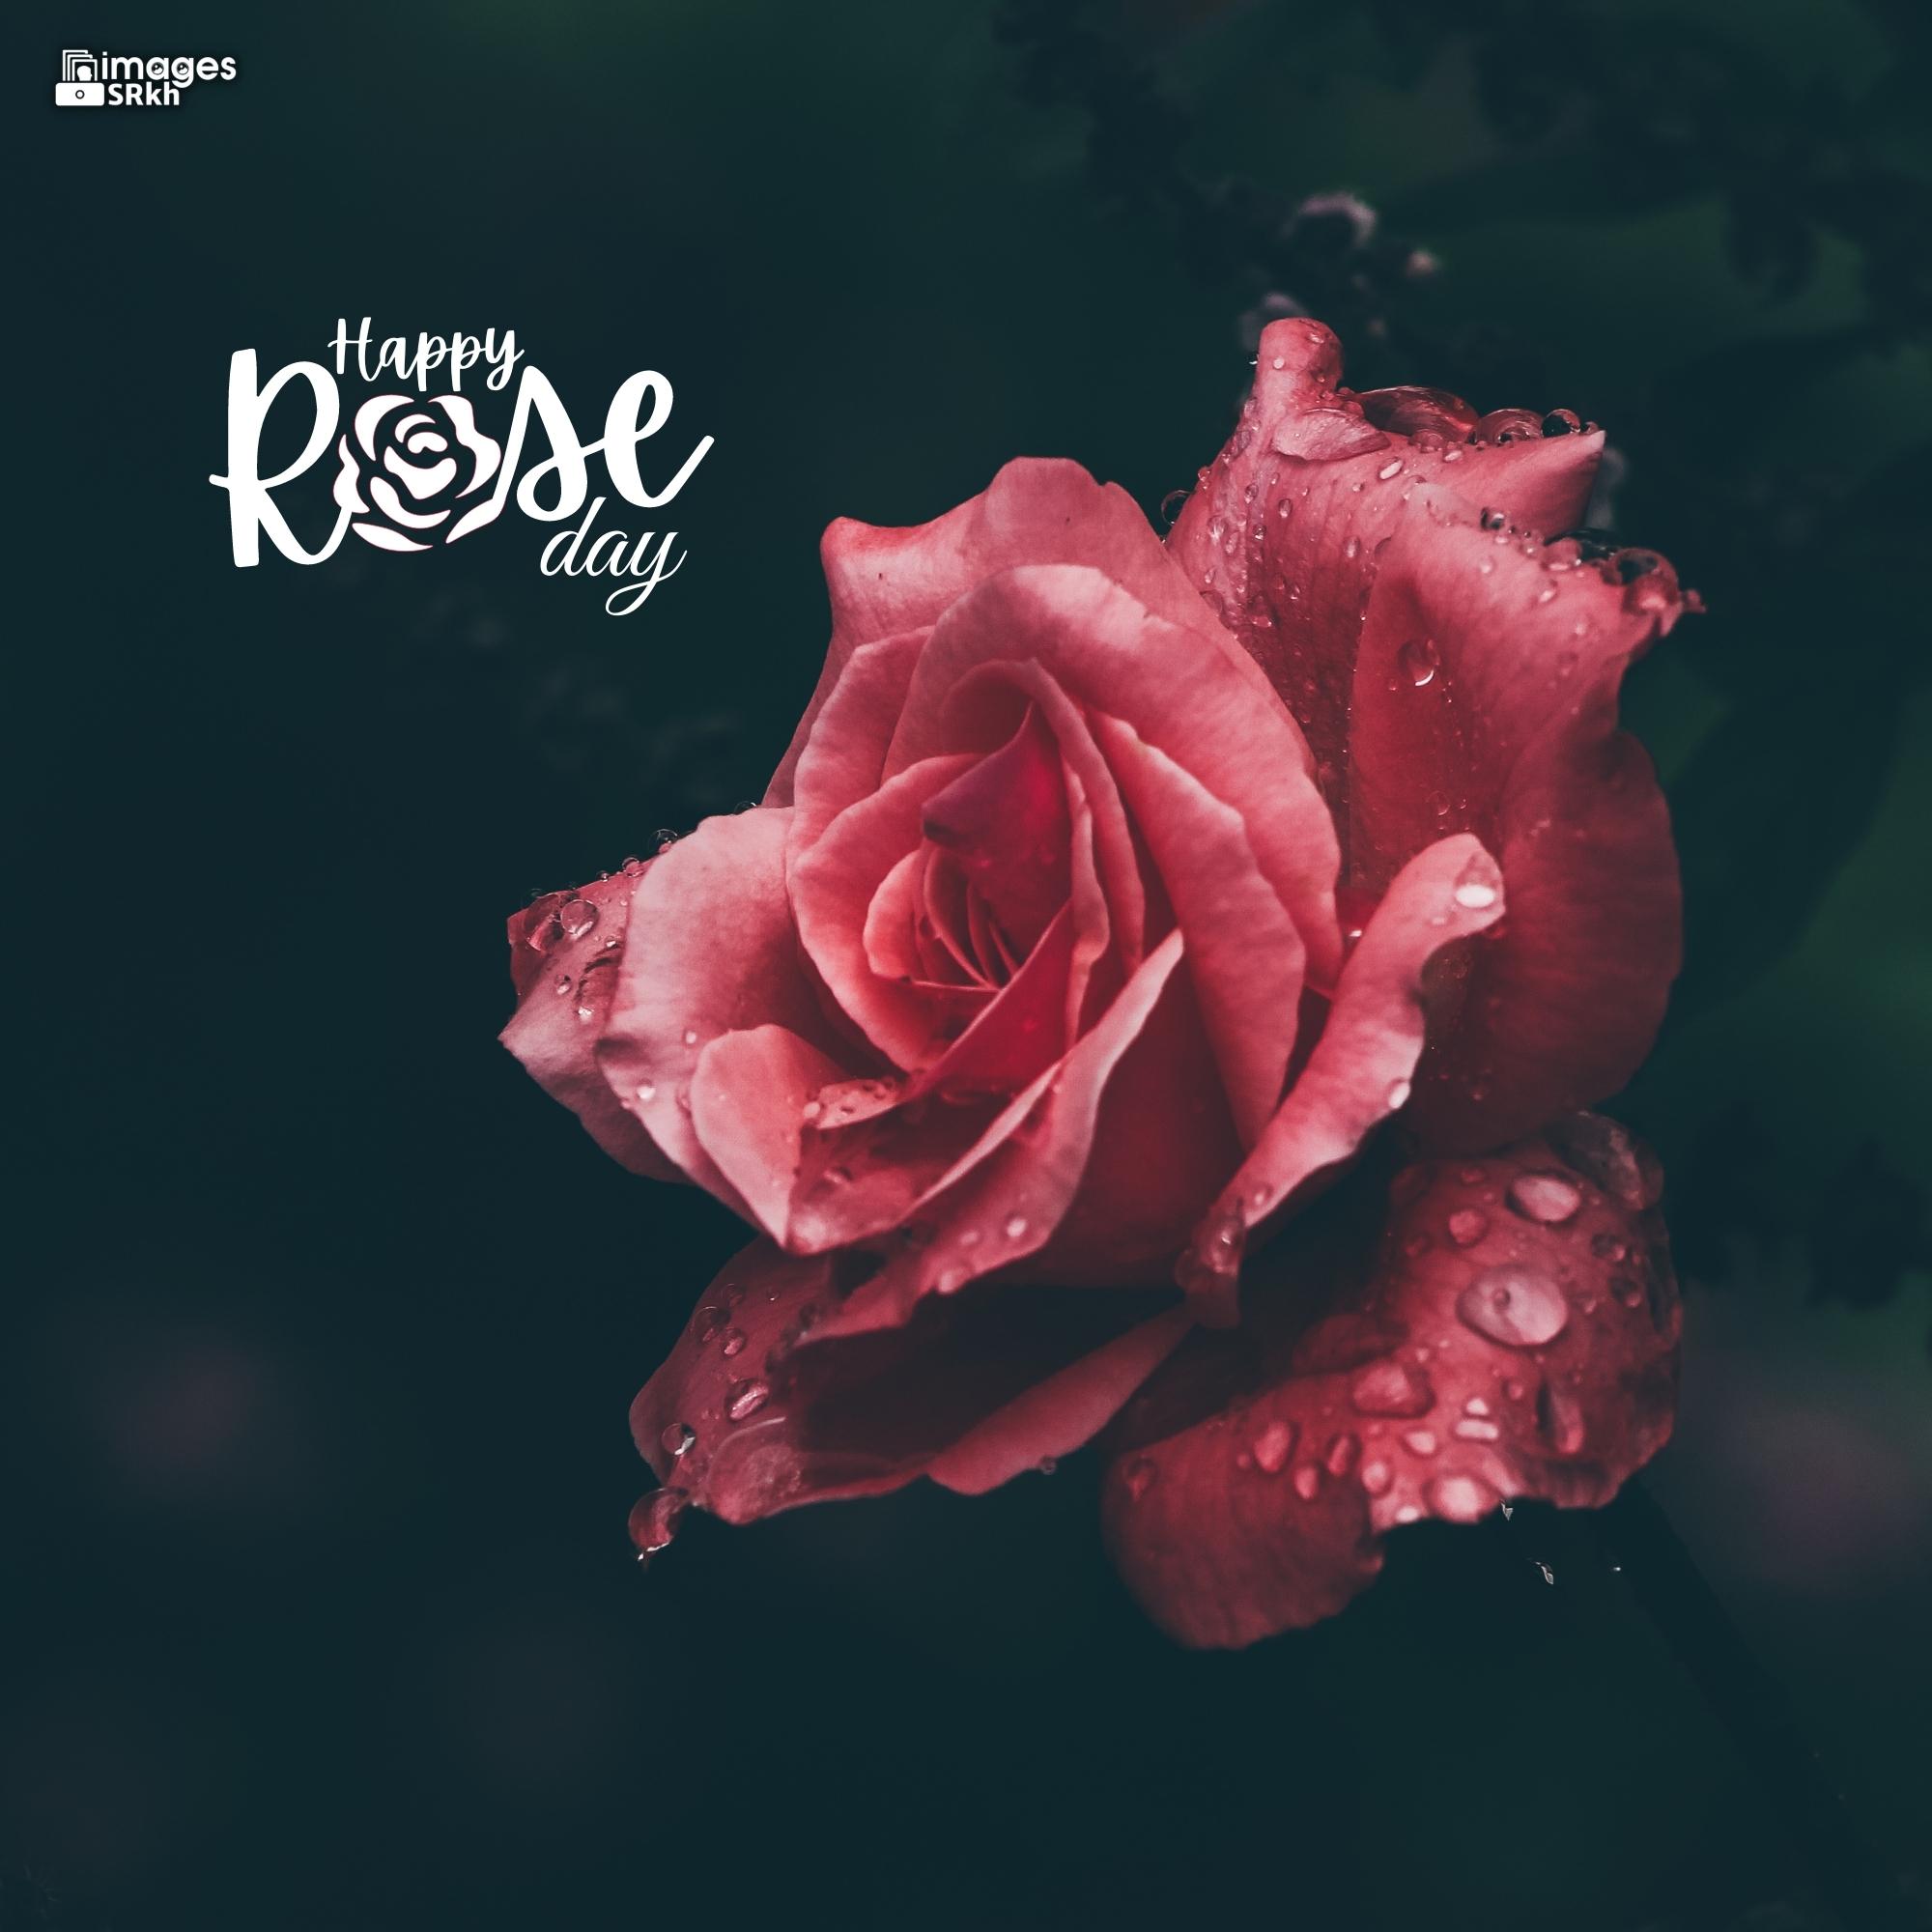 Happy Rose Day Image Hd Download (22)